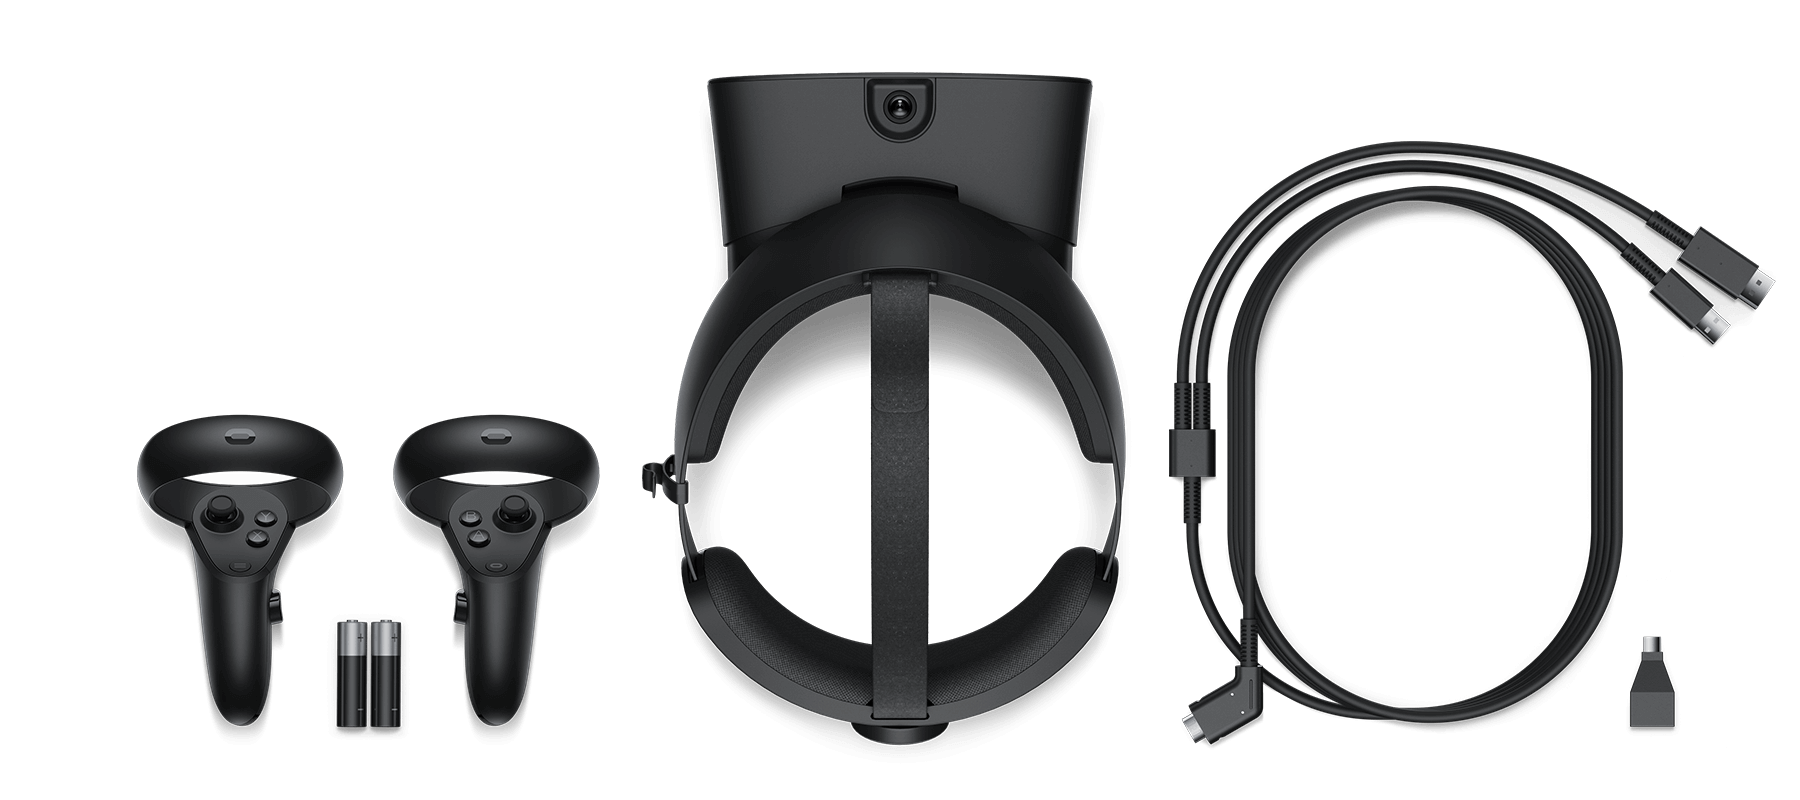 pack complet oculus rift s (casque, manette, cable)